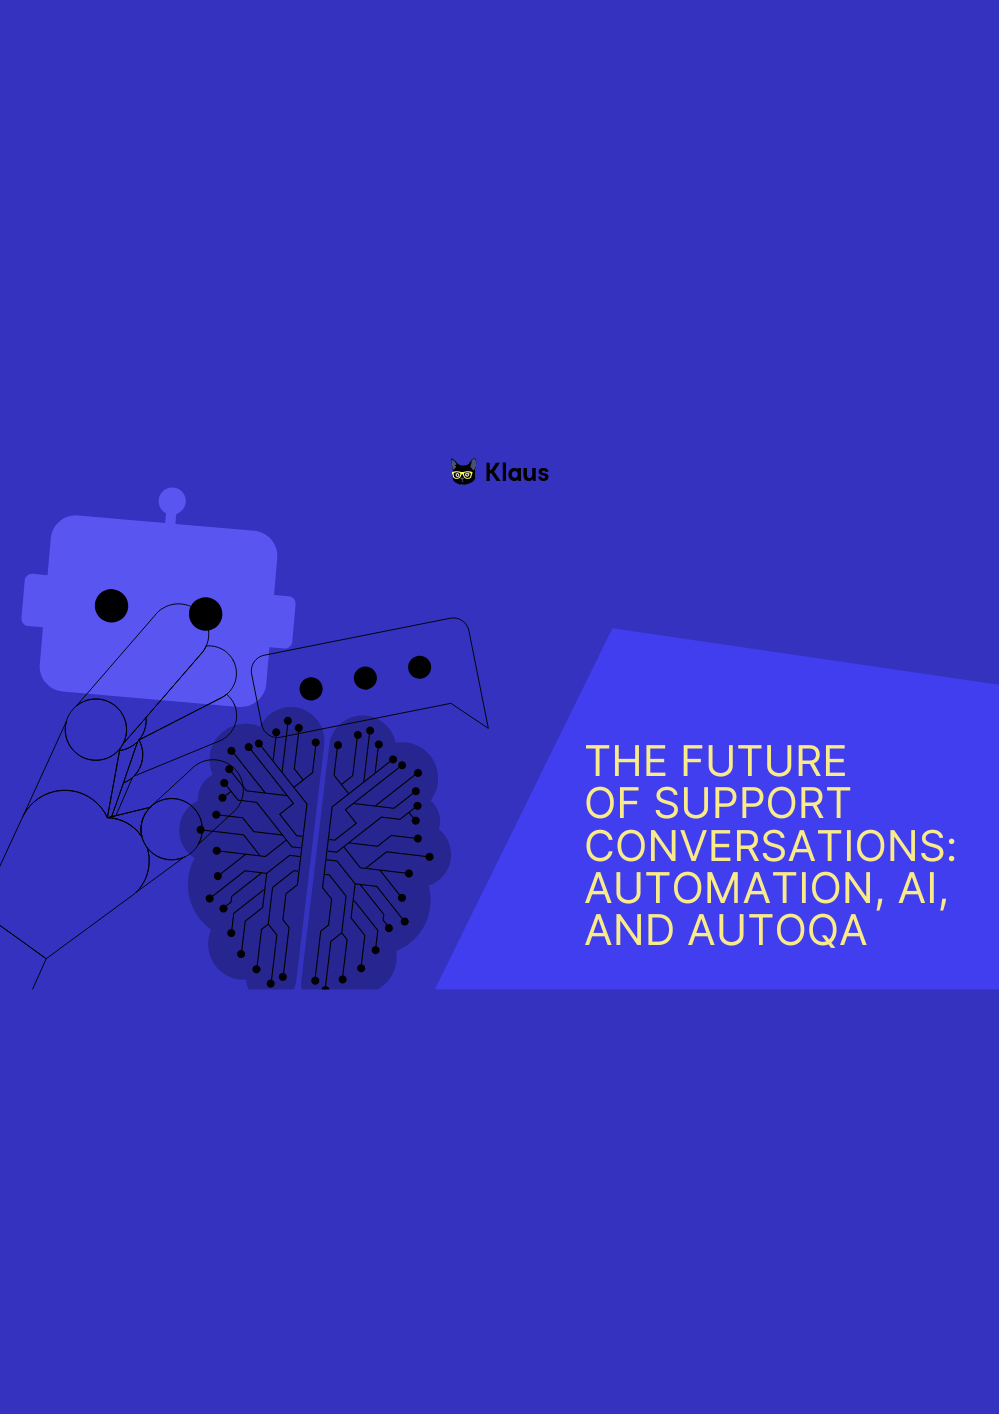 The Future of Conversations